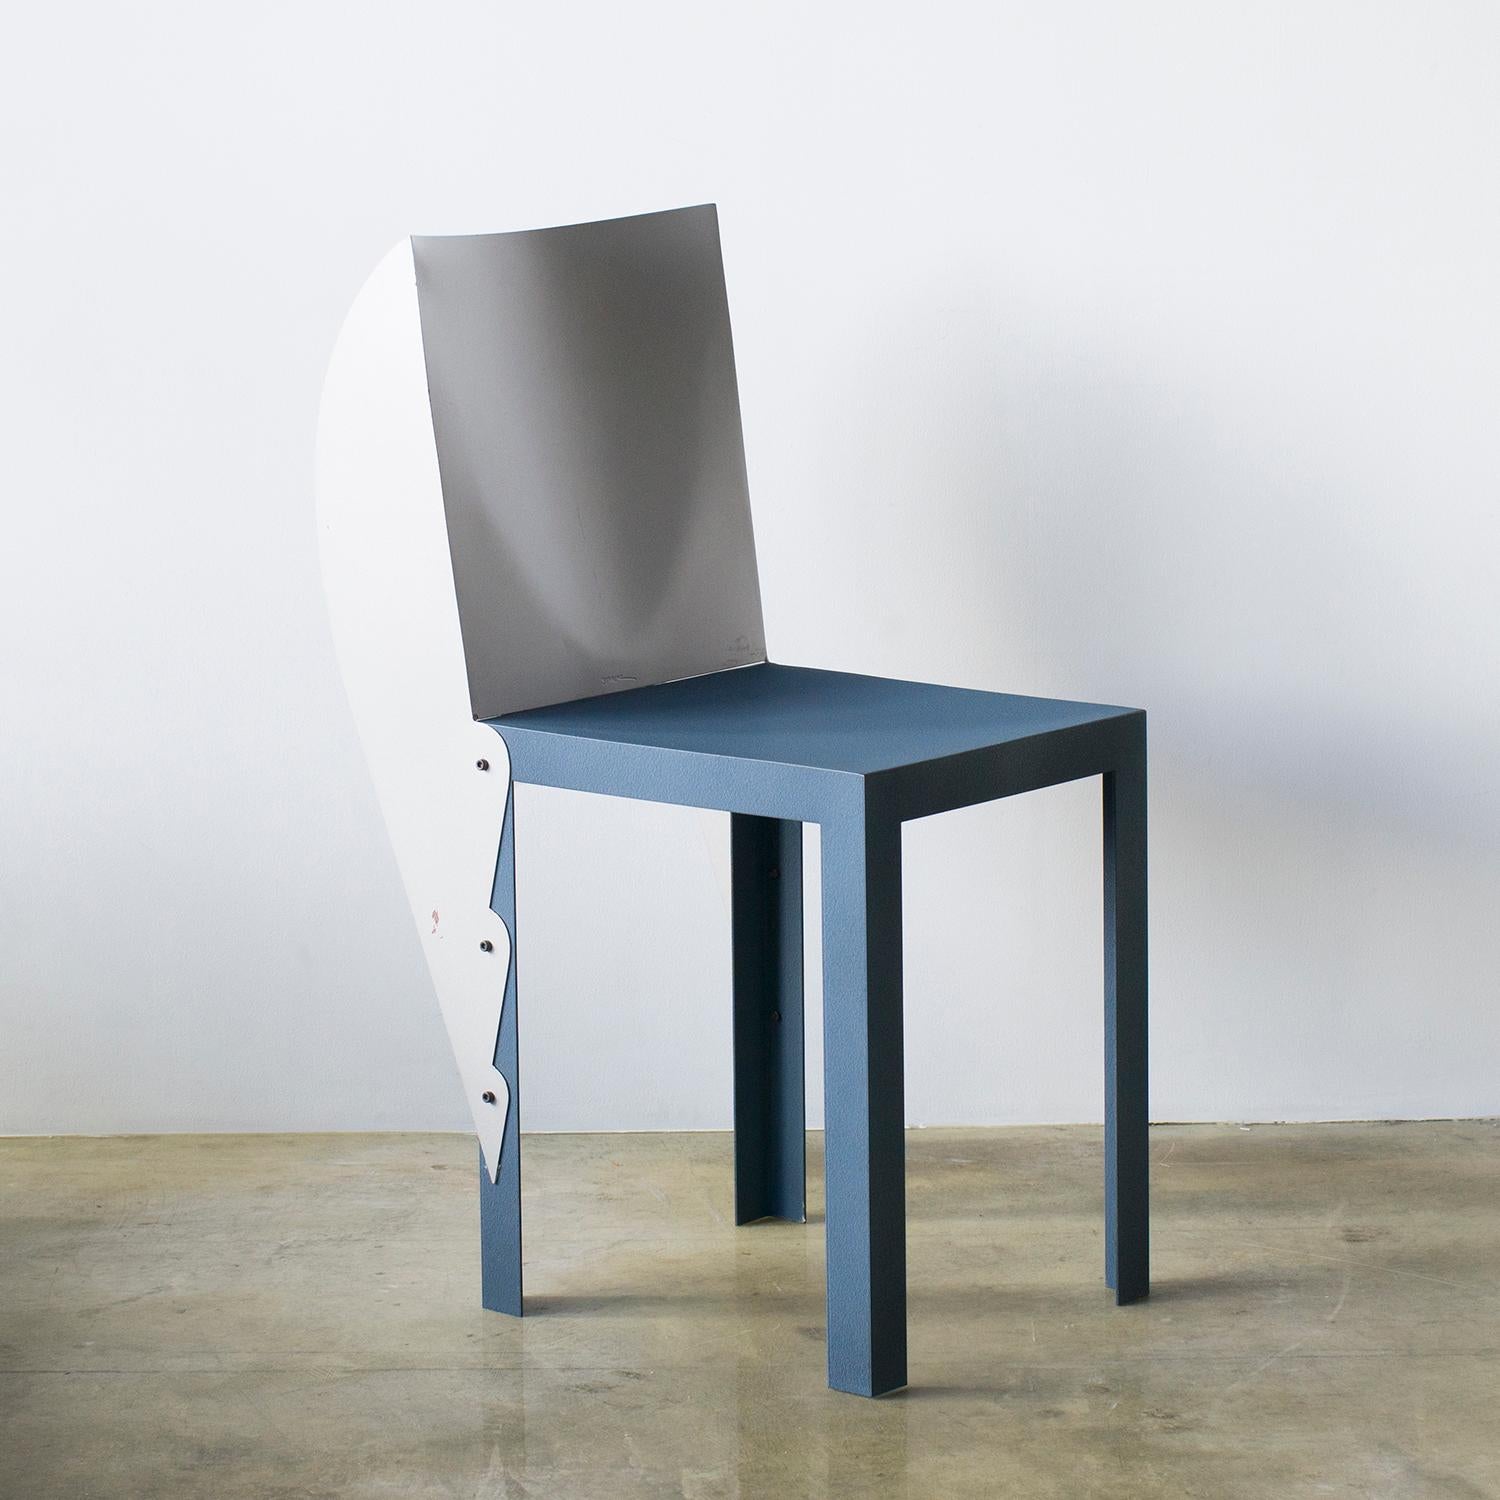 Miss Milch chair designed by Philippe Starck for Idee Japan
Collectable piece of 1980s Starck works.